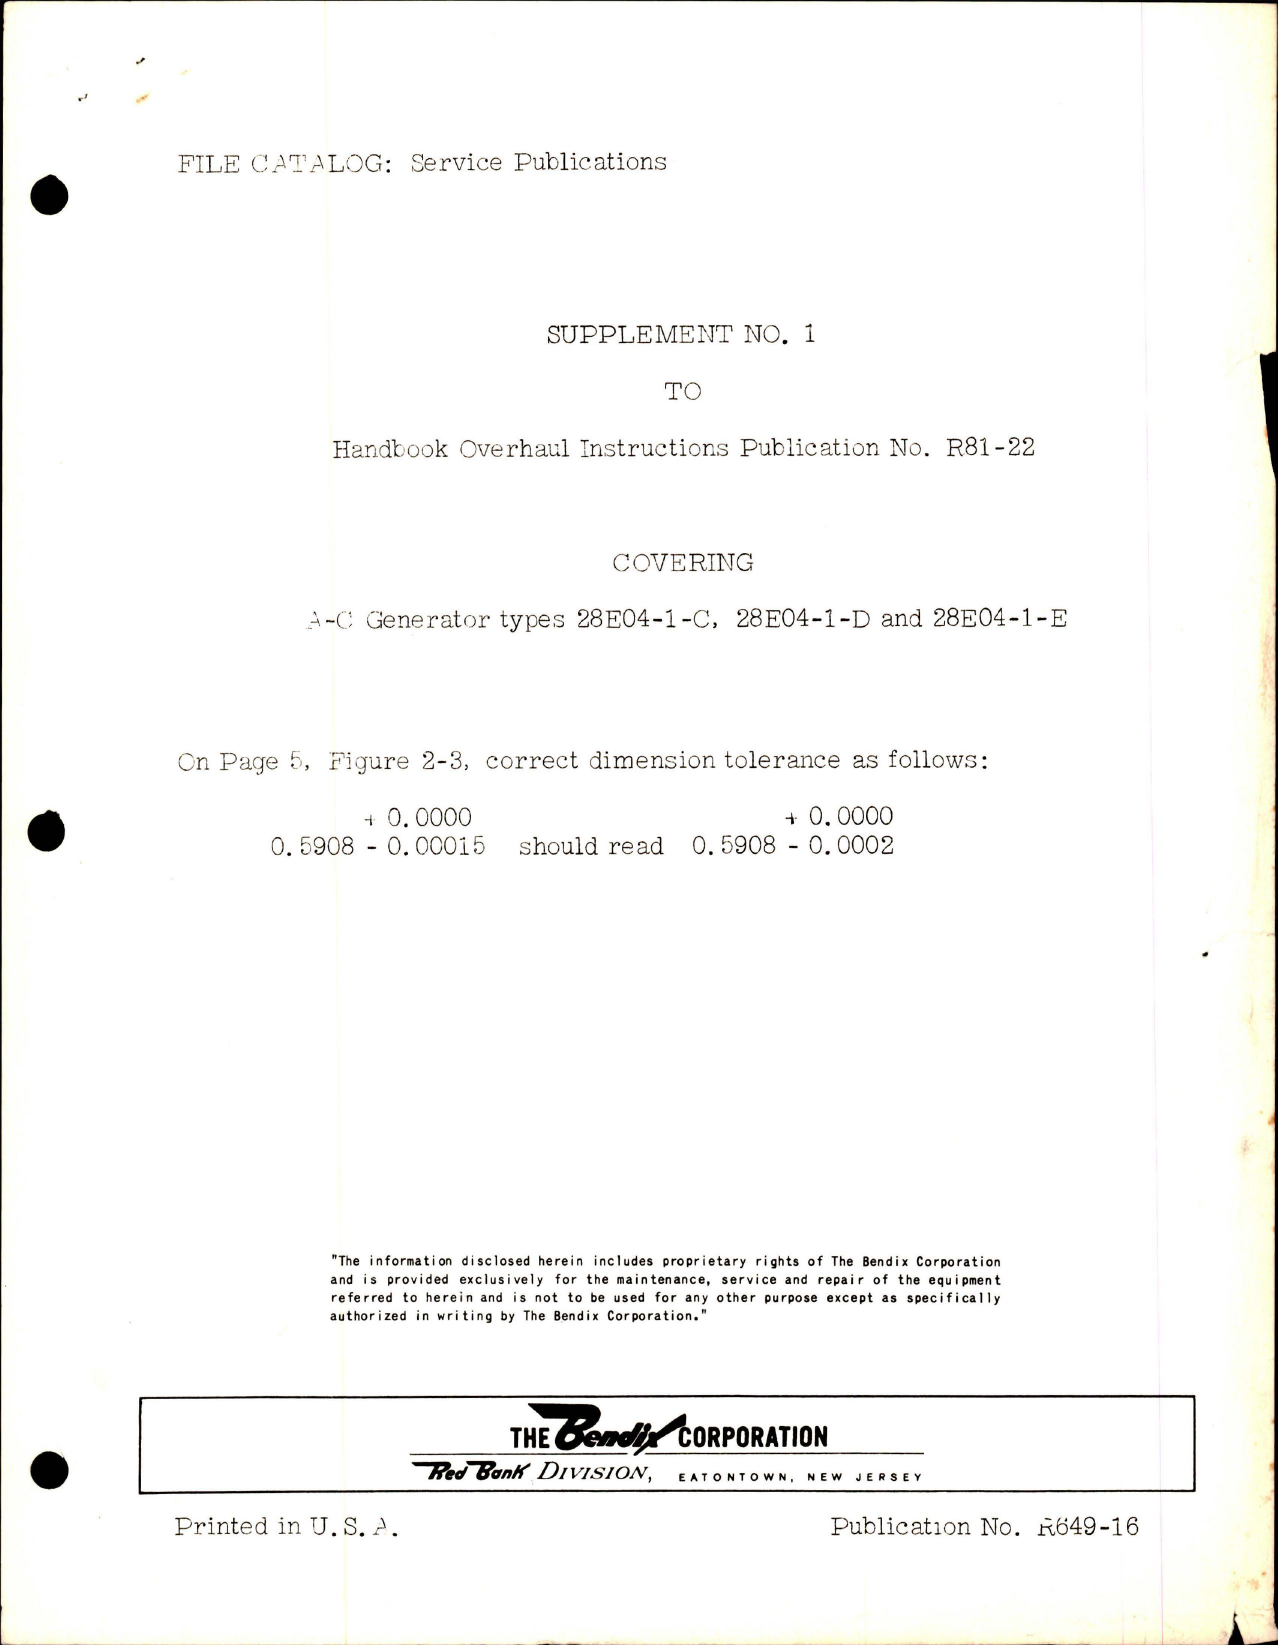 Sample page 1 from AirCorps Library document: Supplement No. 1 to Overhaul Instructions Pub R81-22 - A-C Generator - Types 28E04-1-C, 28E04-1-D, 28E04-1-E